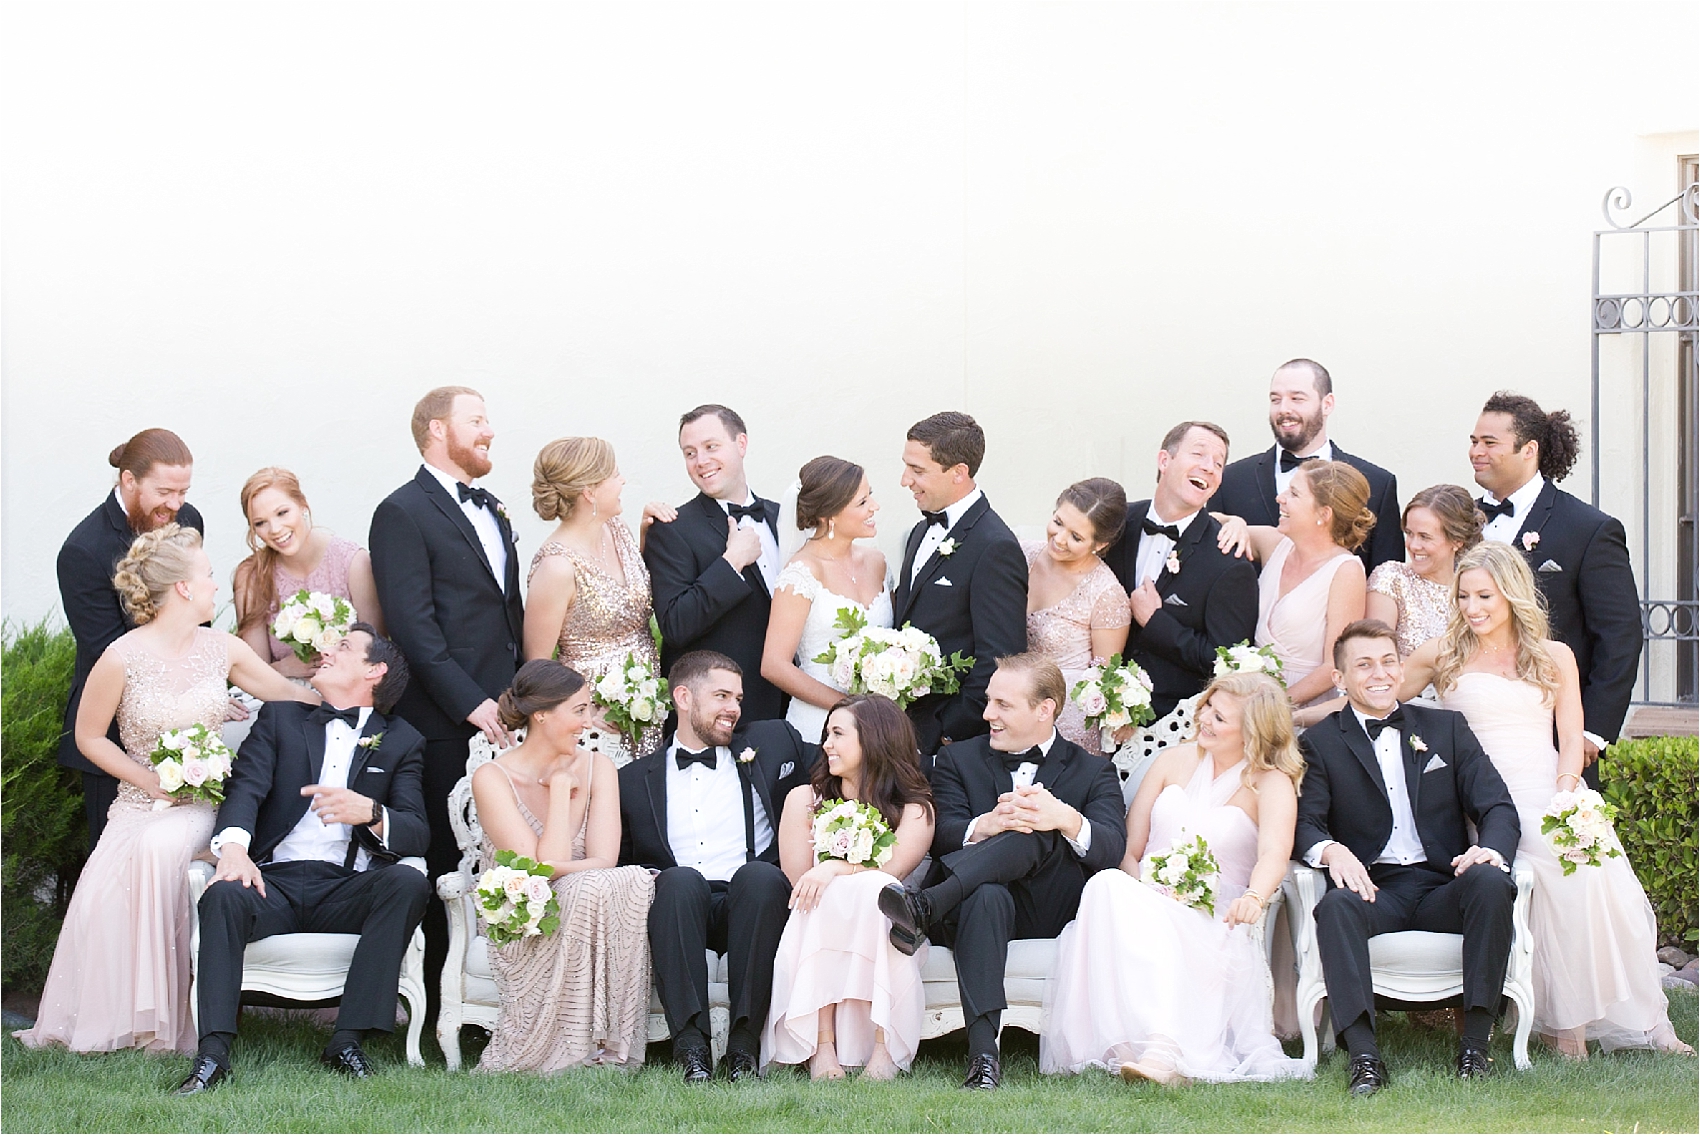 How to Organize Large Group Photos